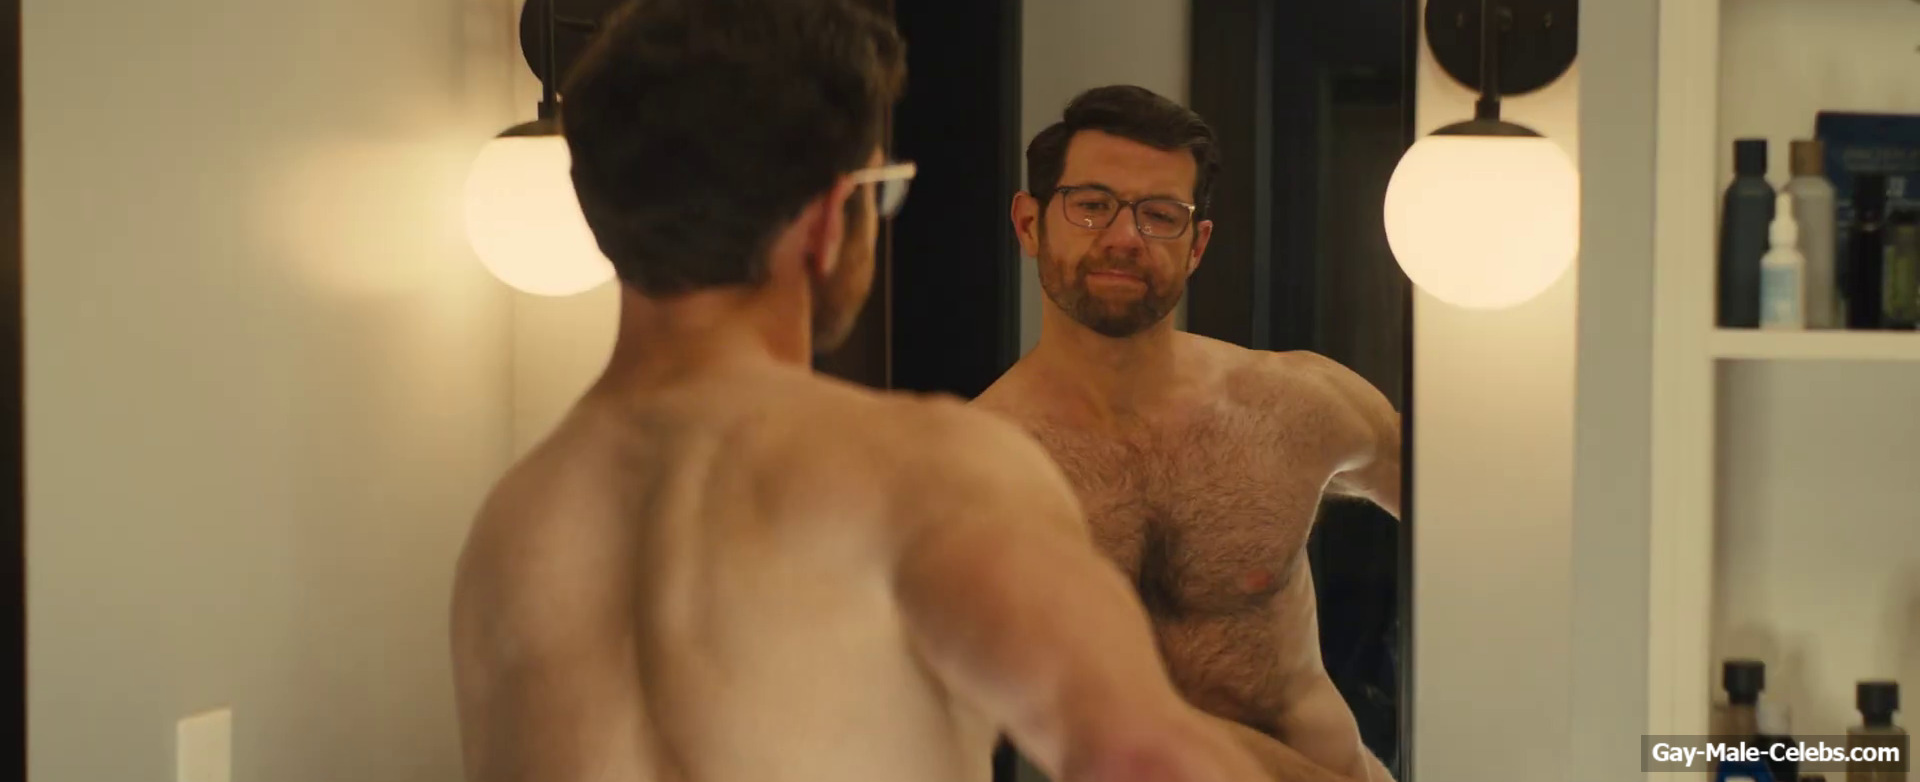 Billy Eichner Bares His Tight Ass in Bros